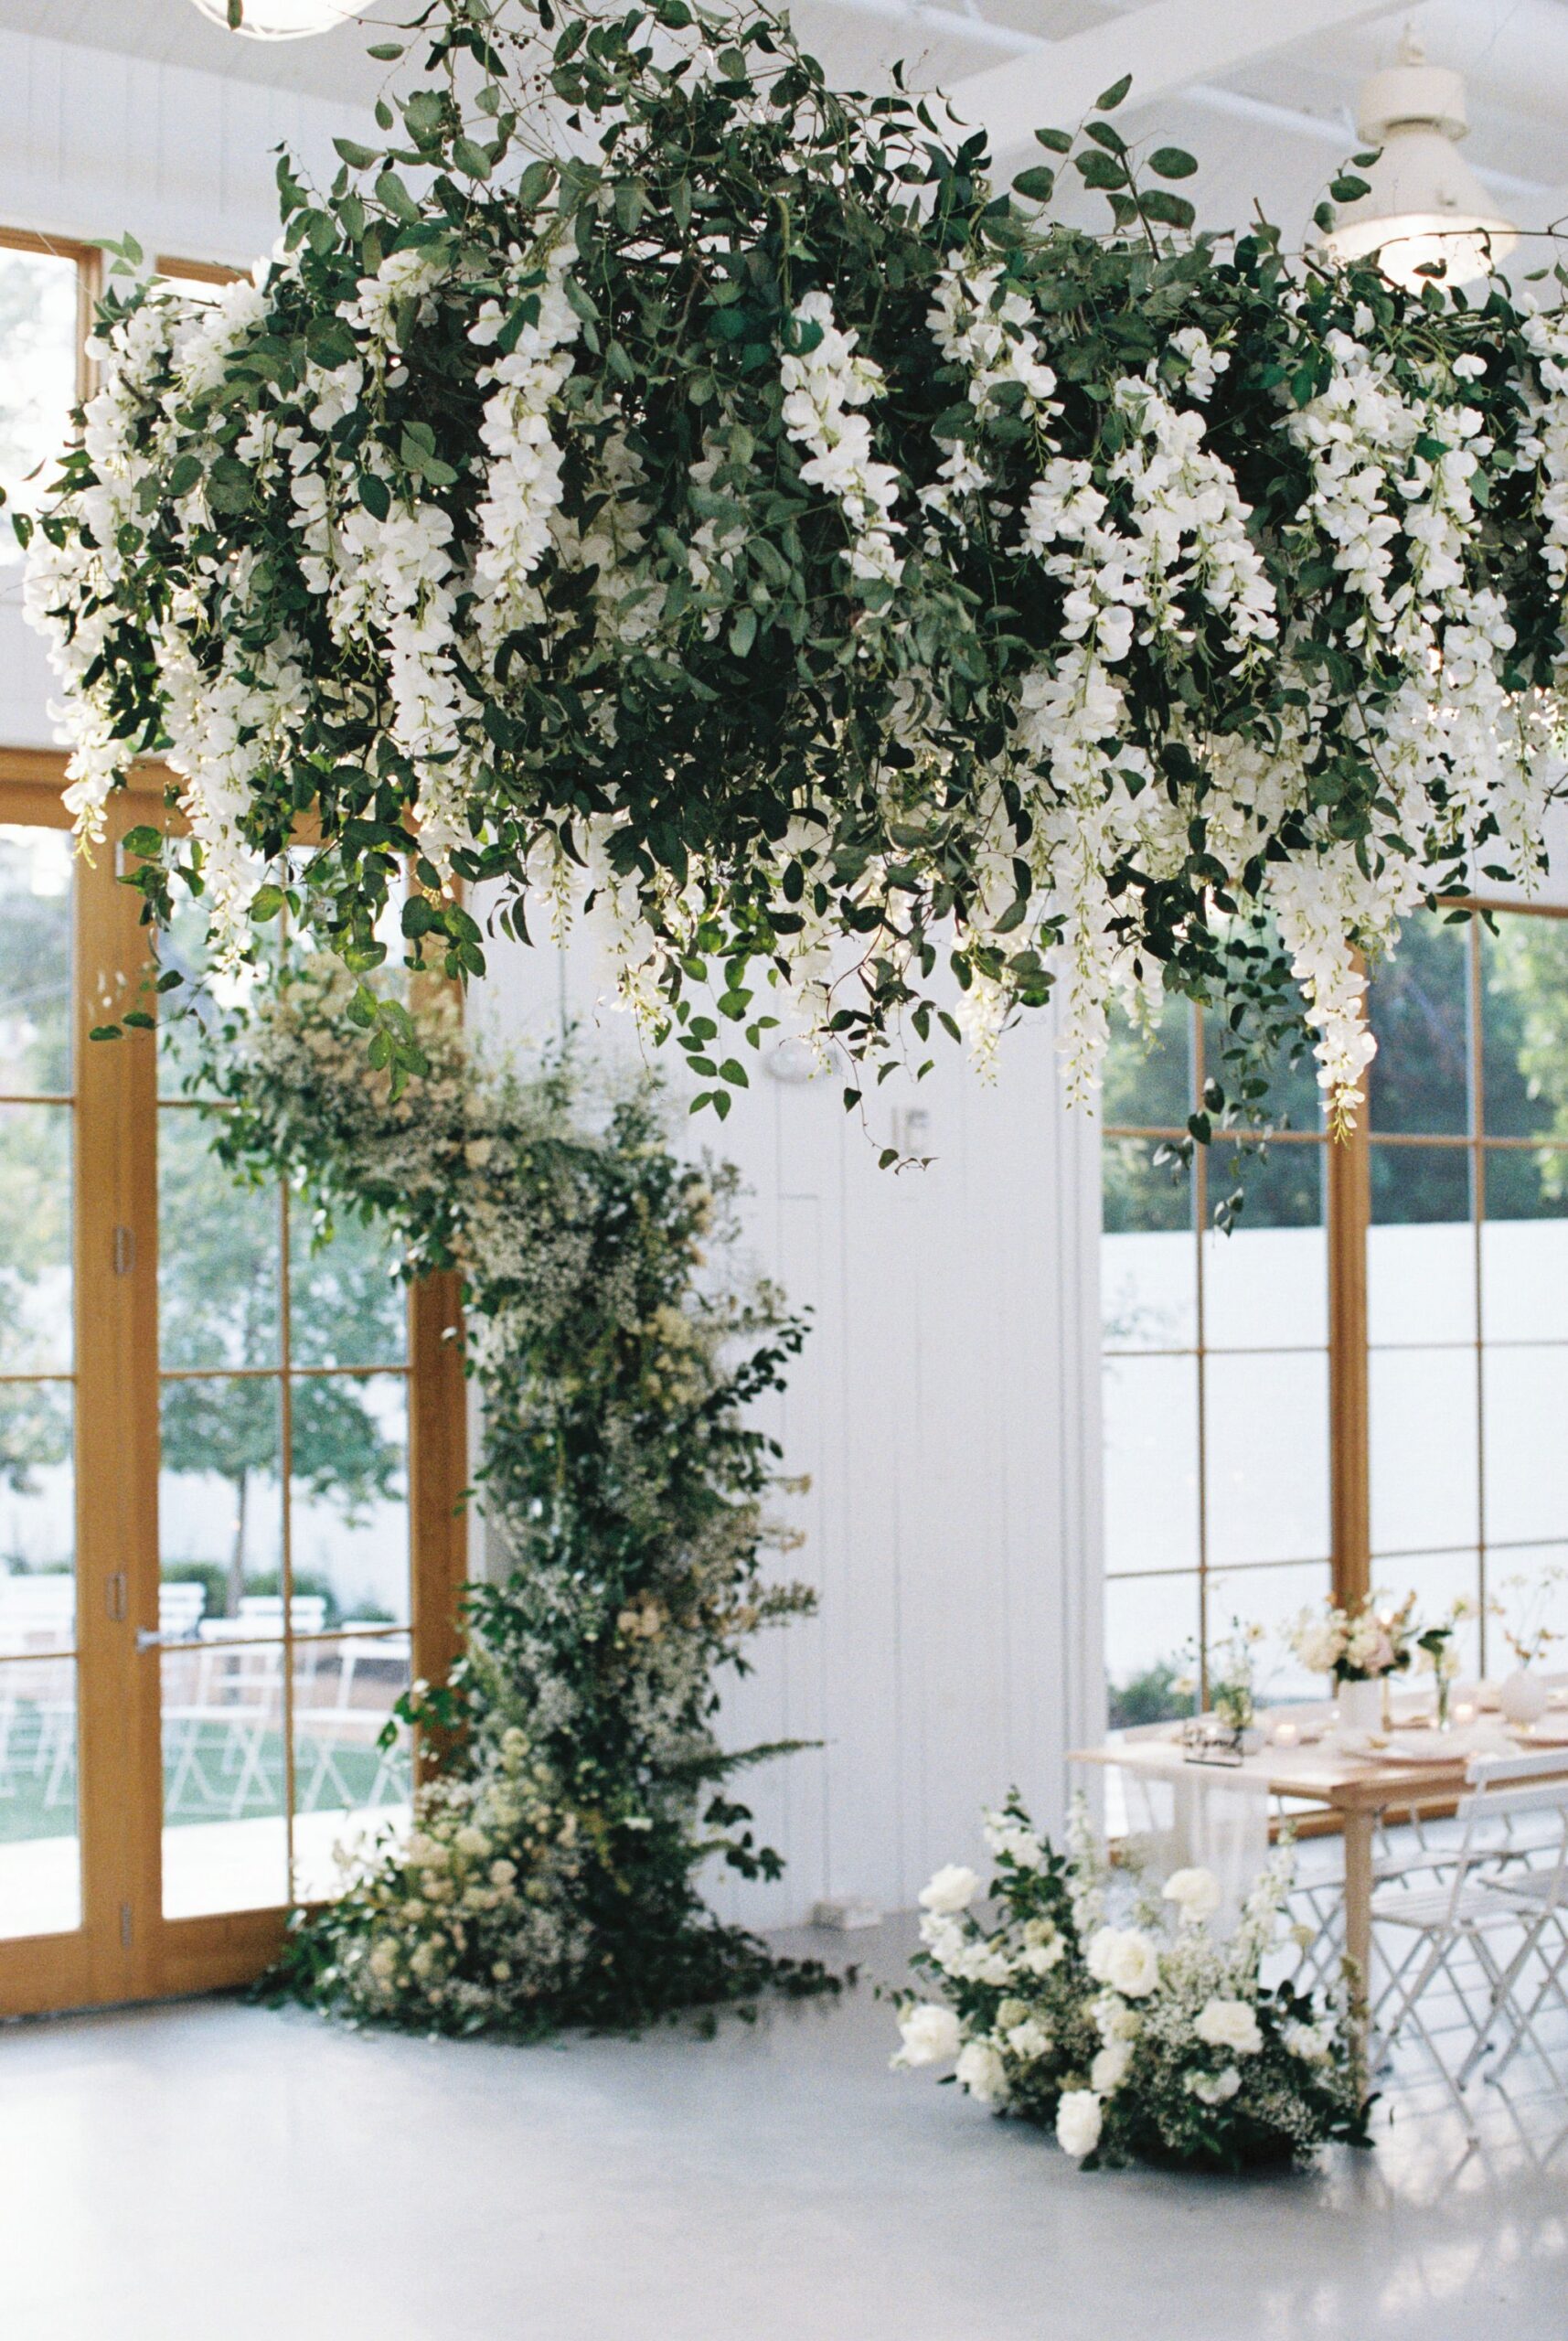 Dreamy hanging floral and greenery installation at wedding reception